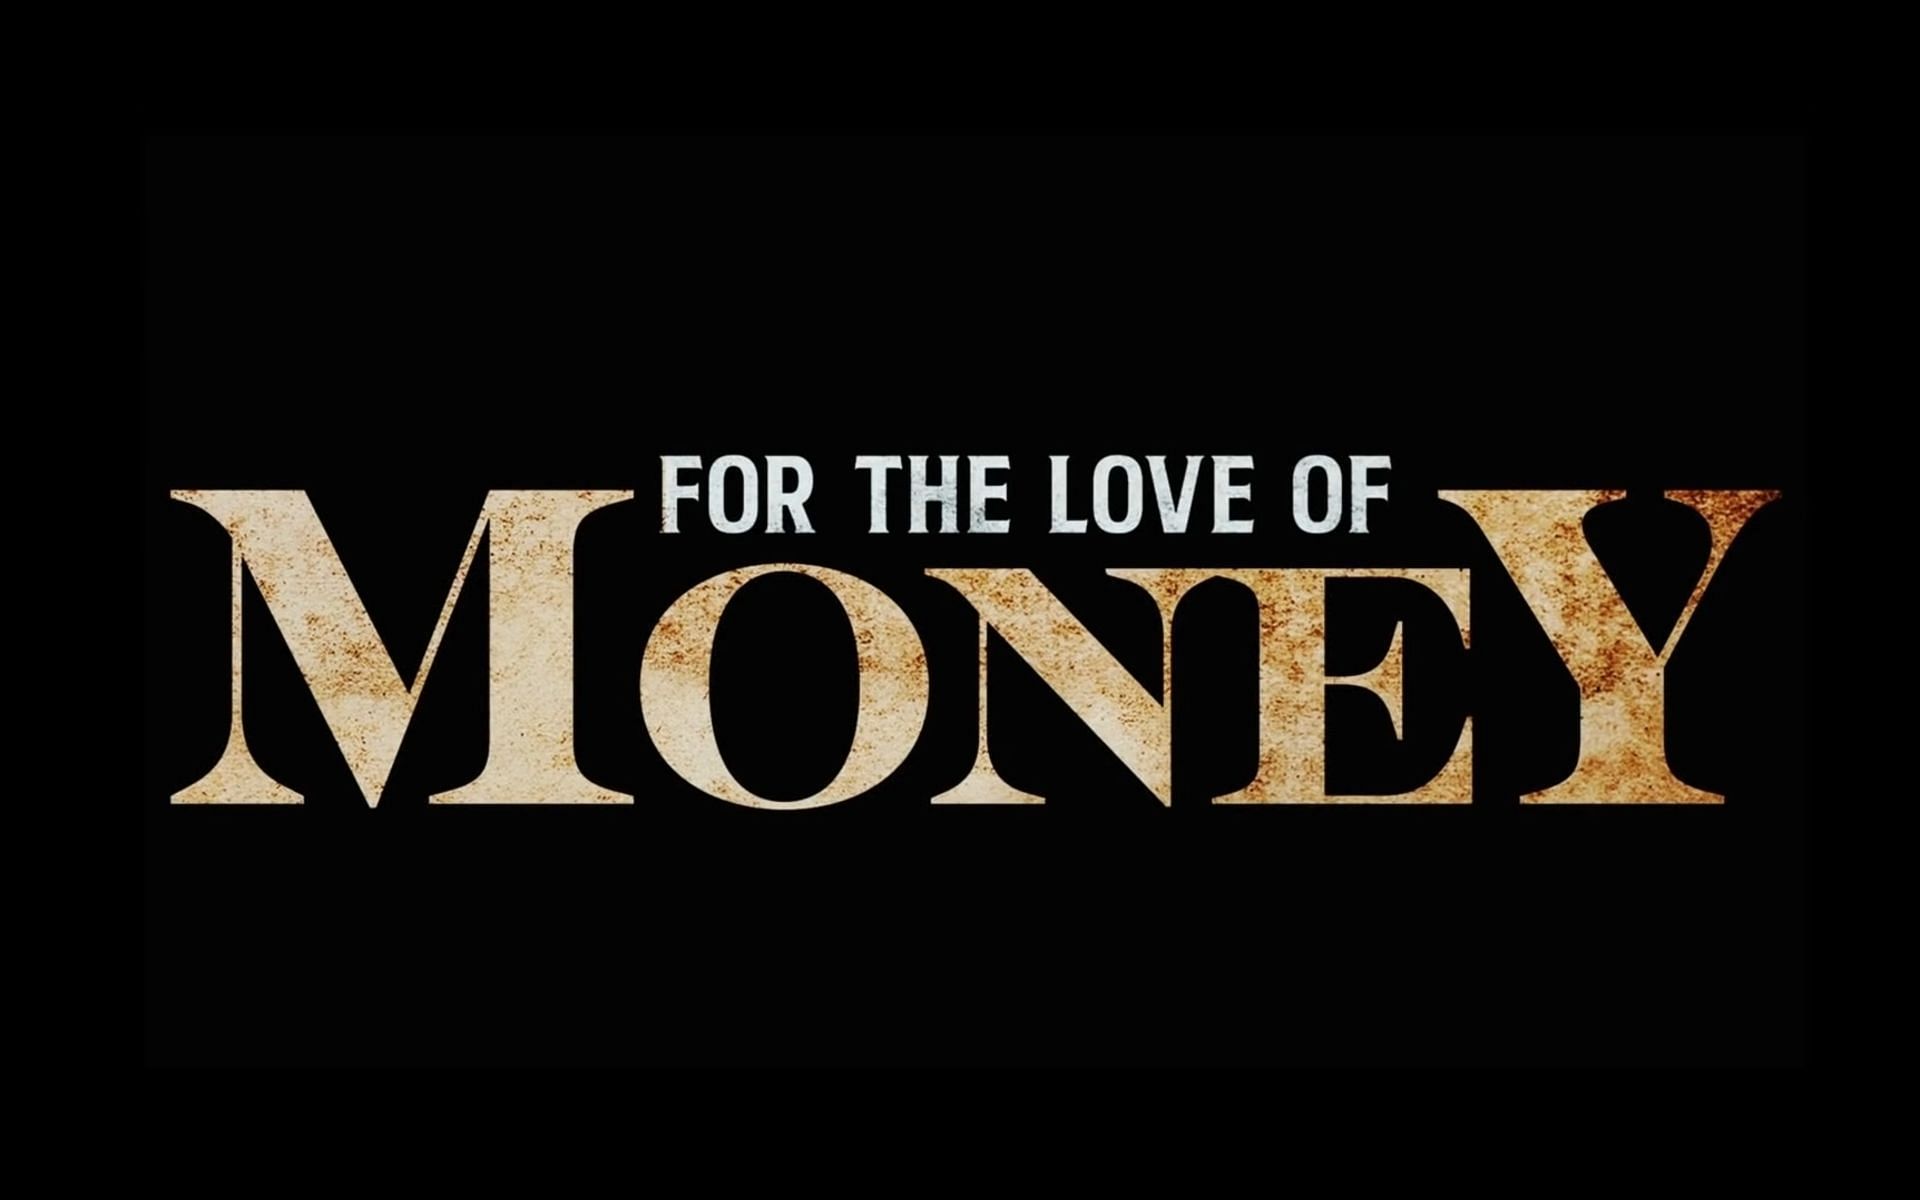 For the Love of Money (Image via Melvin Childs Presents)